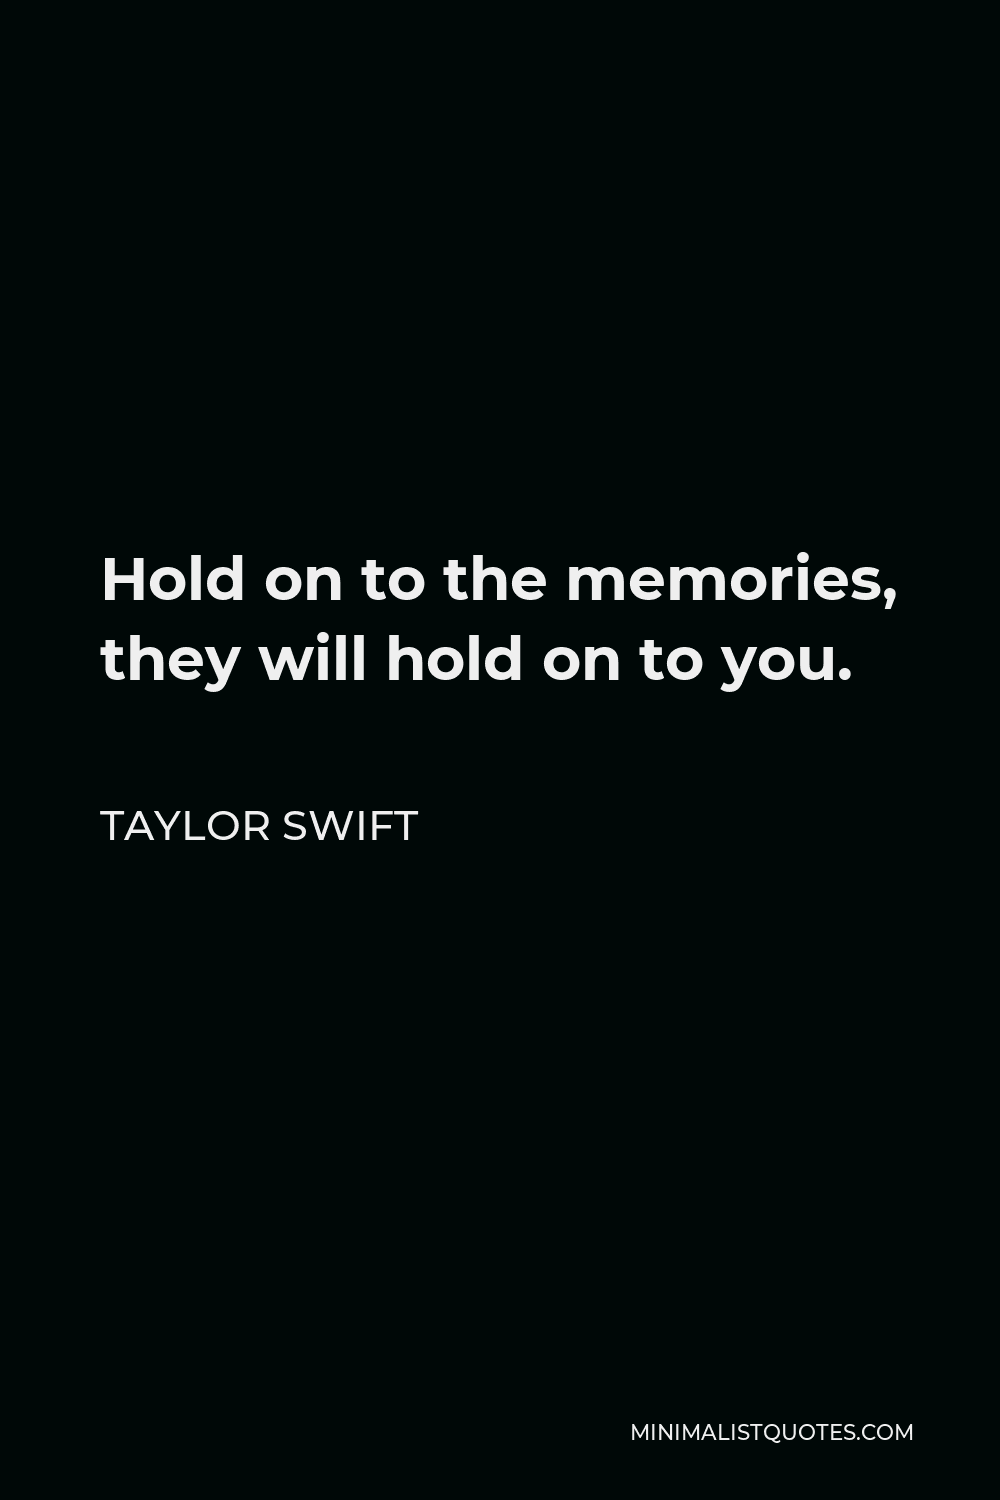 Taylor Swift Quote - Hold on to the memories, they will hold on to you.